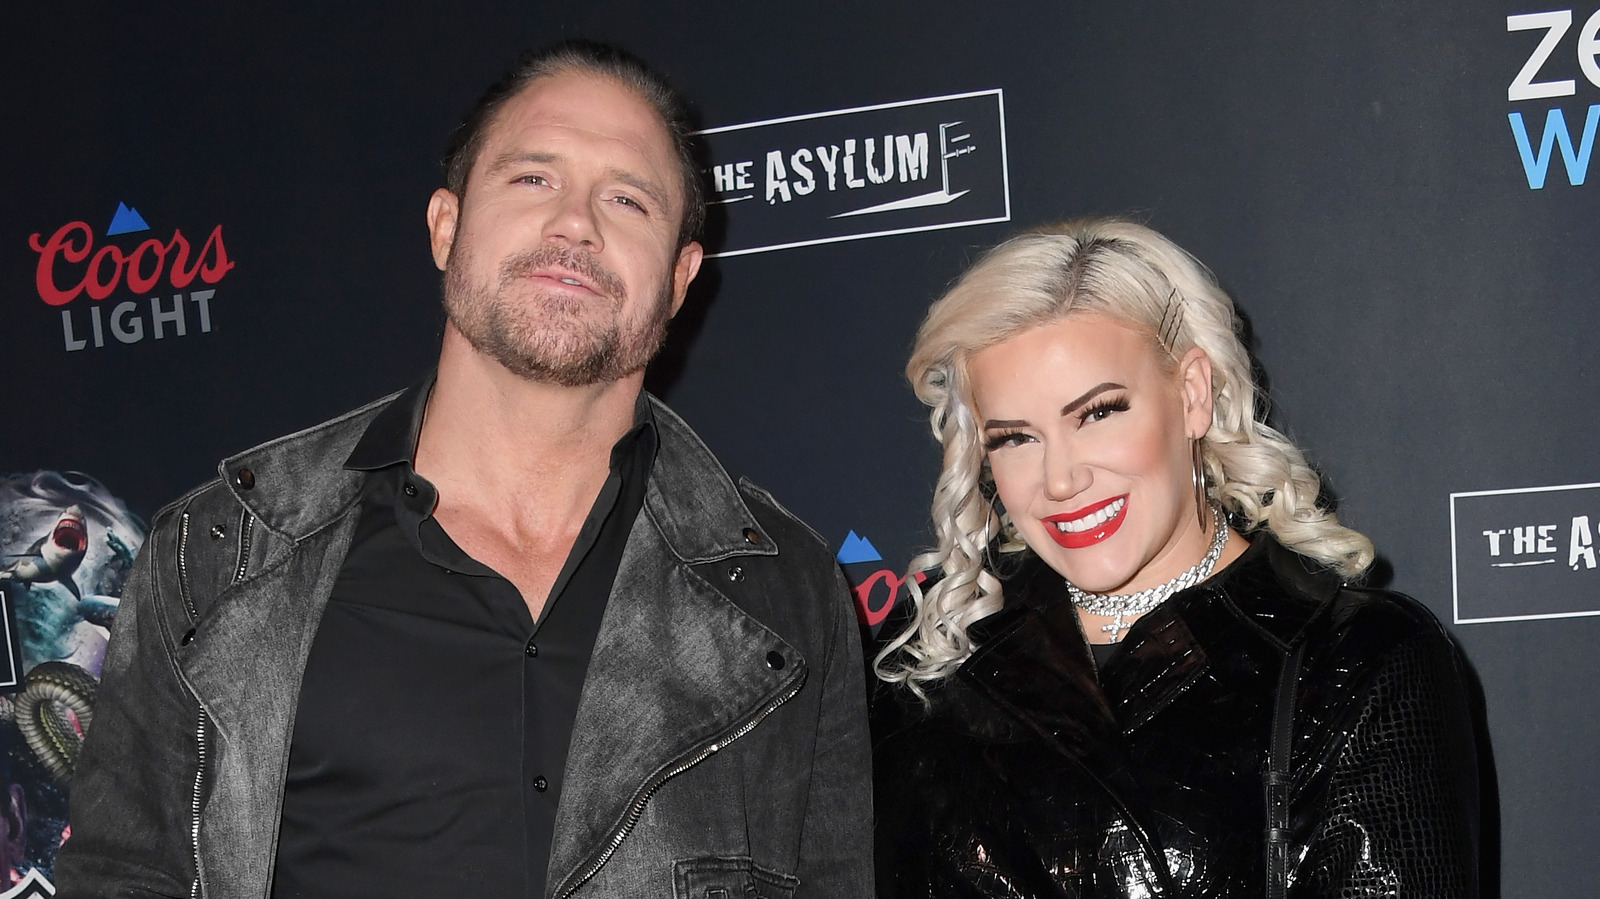 AEW Stars Johnny TV And Taya Valkyrie Talk About Working Together